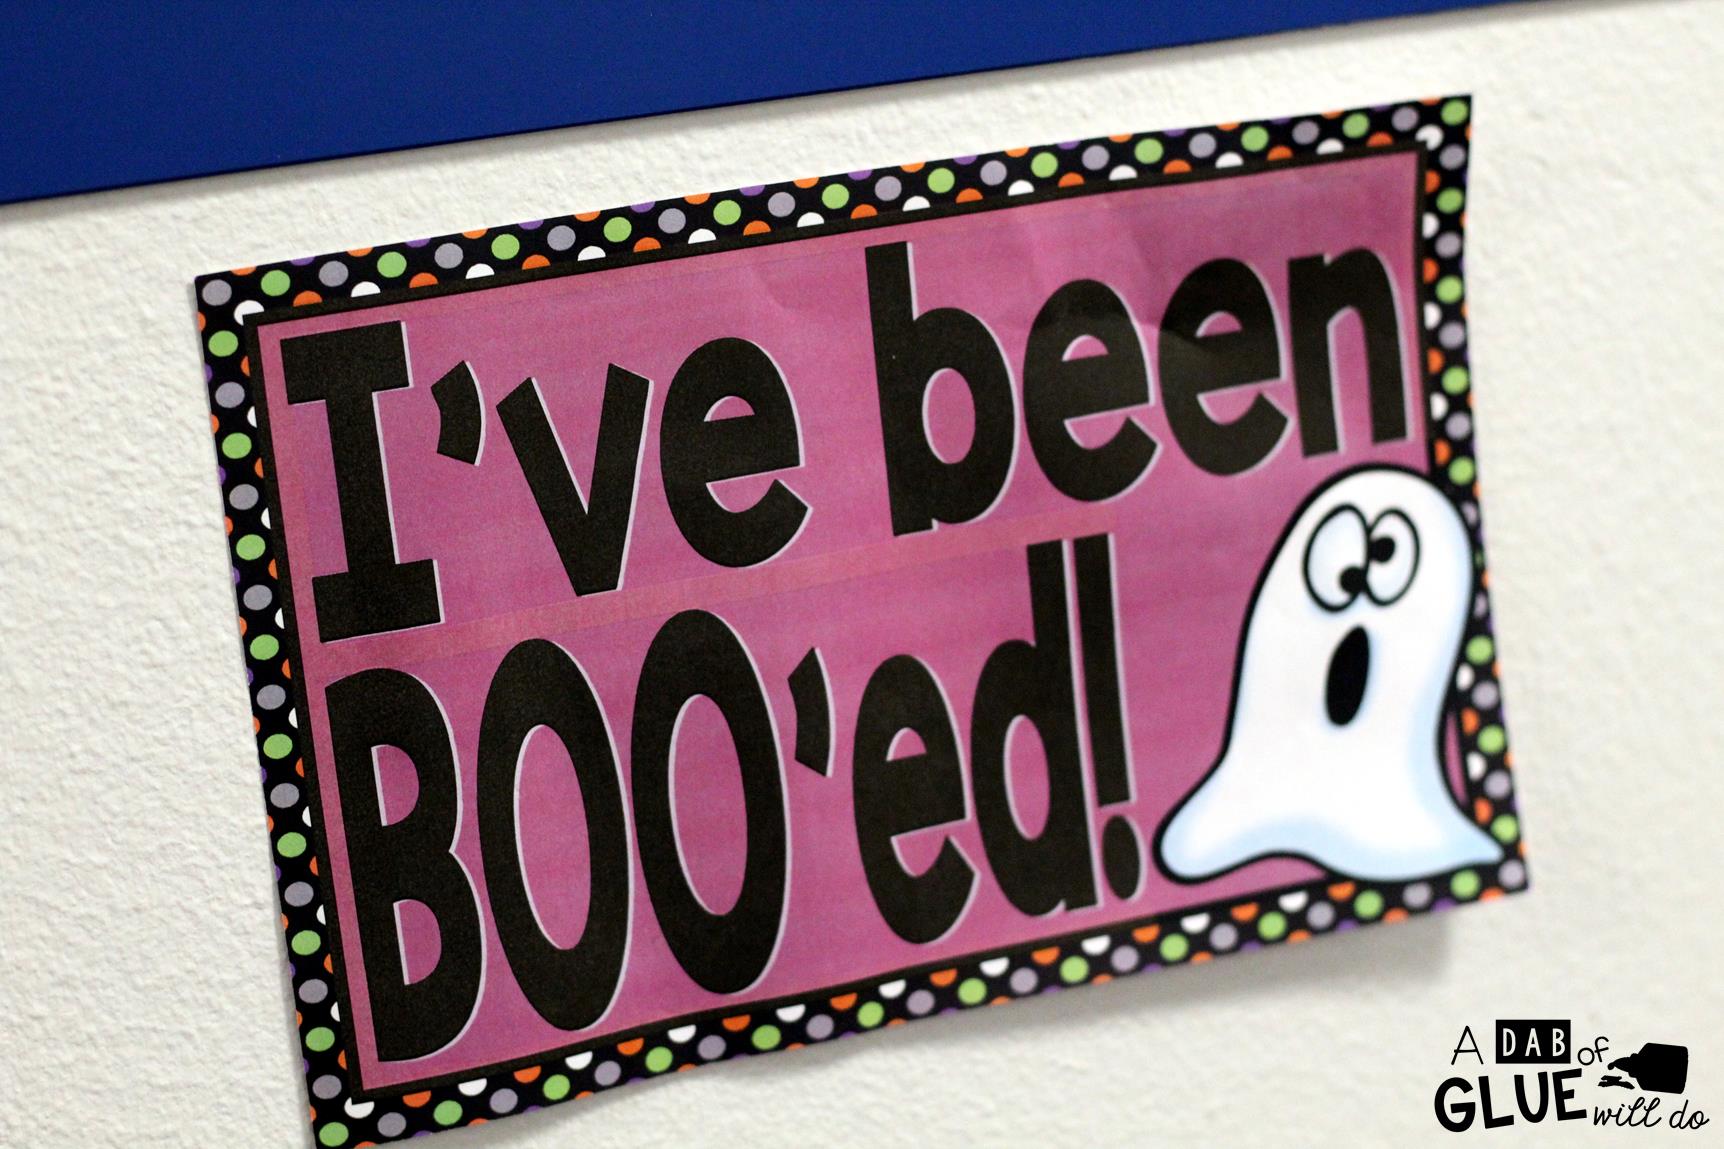 Boo! Basket is the perfect way to start the Holiday season. Spread Halloween cheer among the faculty and staff at your school